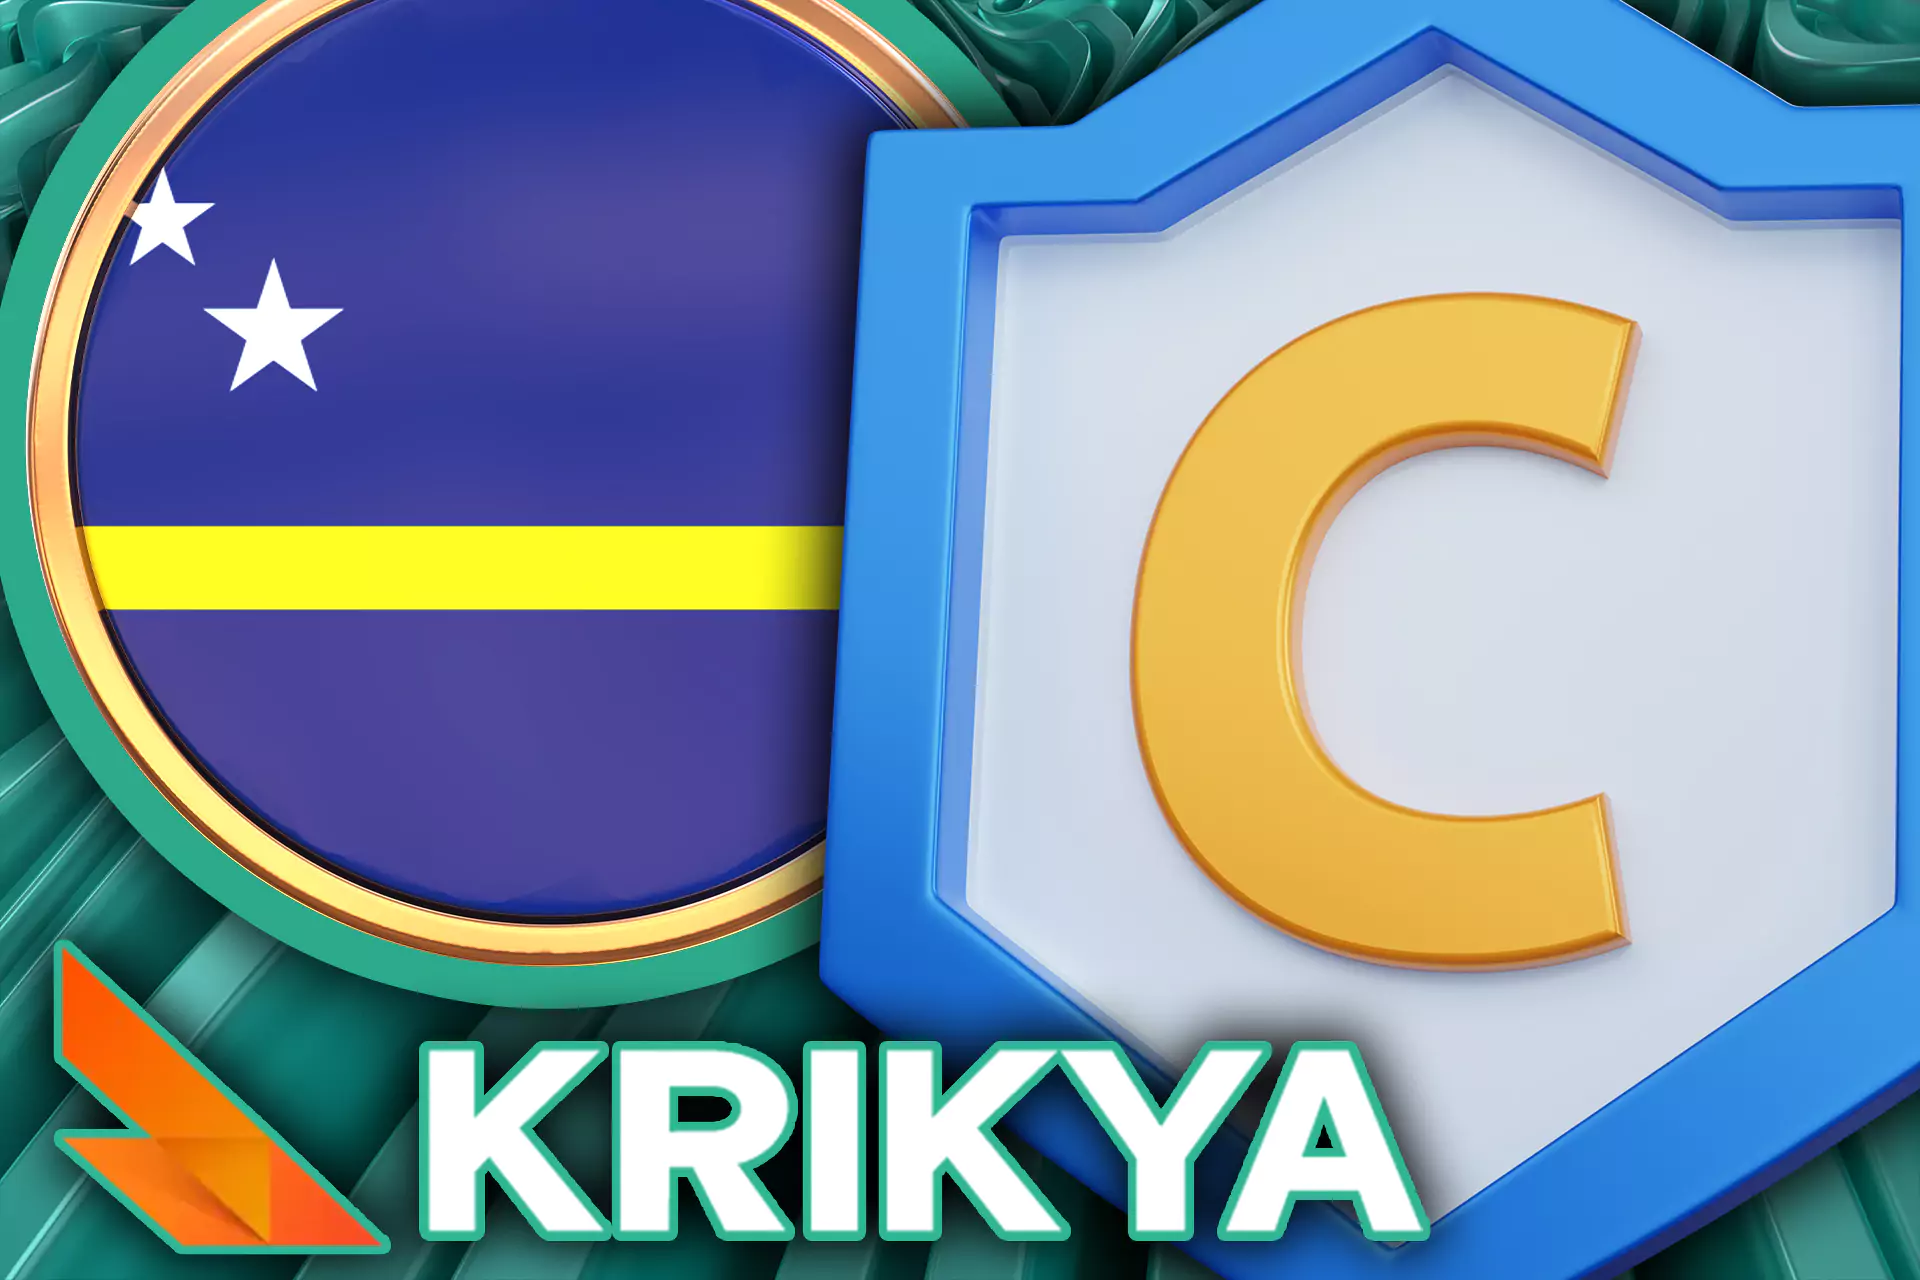 Krikya complies with all the trademarks it owns.